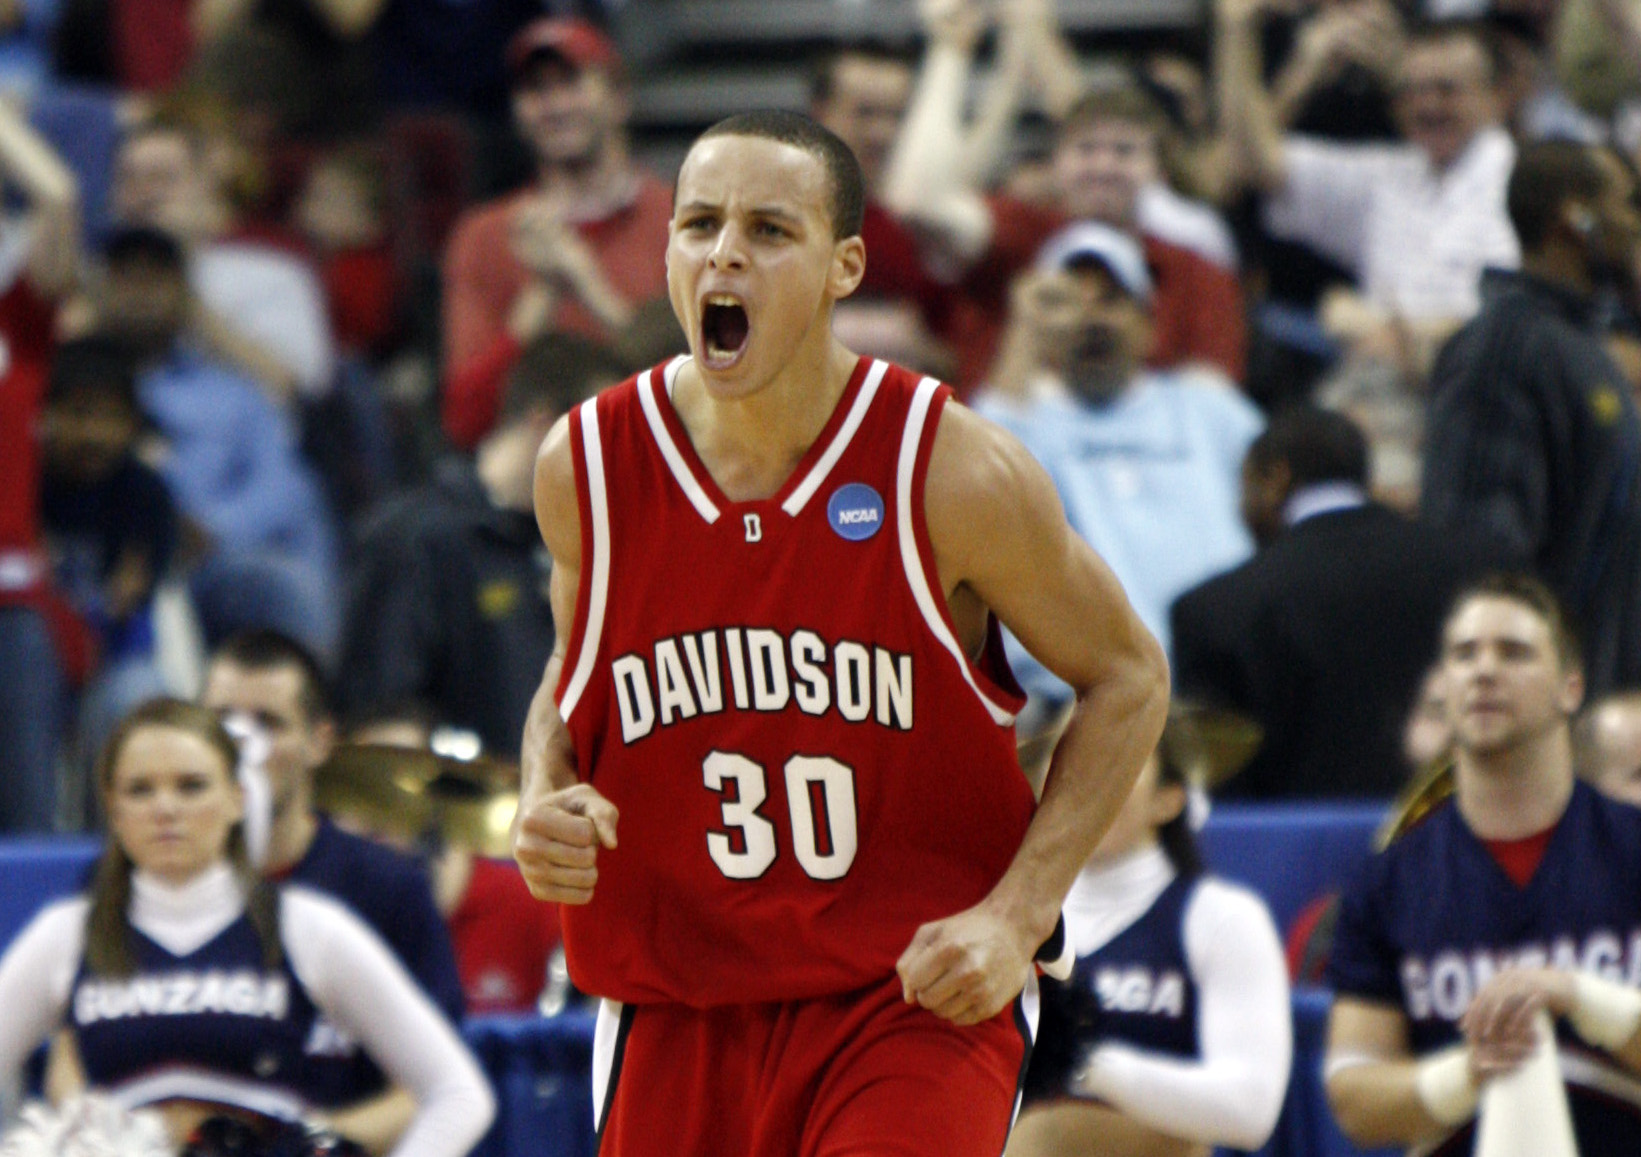 Brutal reason why Steph Curry wore No. 20 and not No. 30 in high school